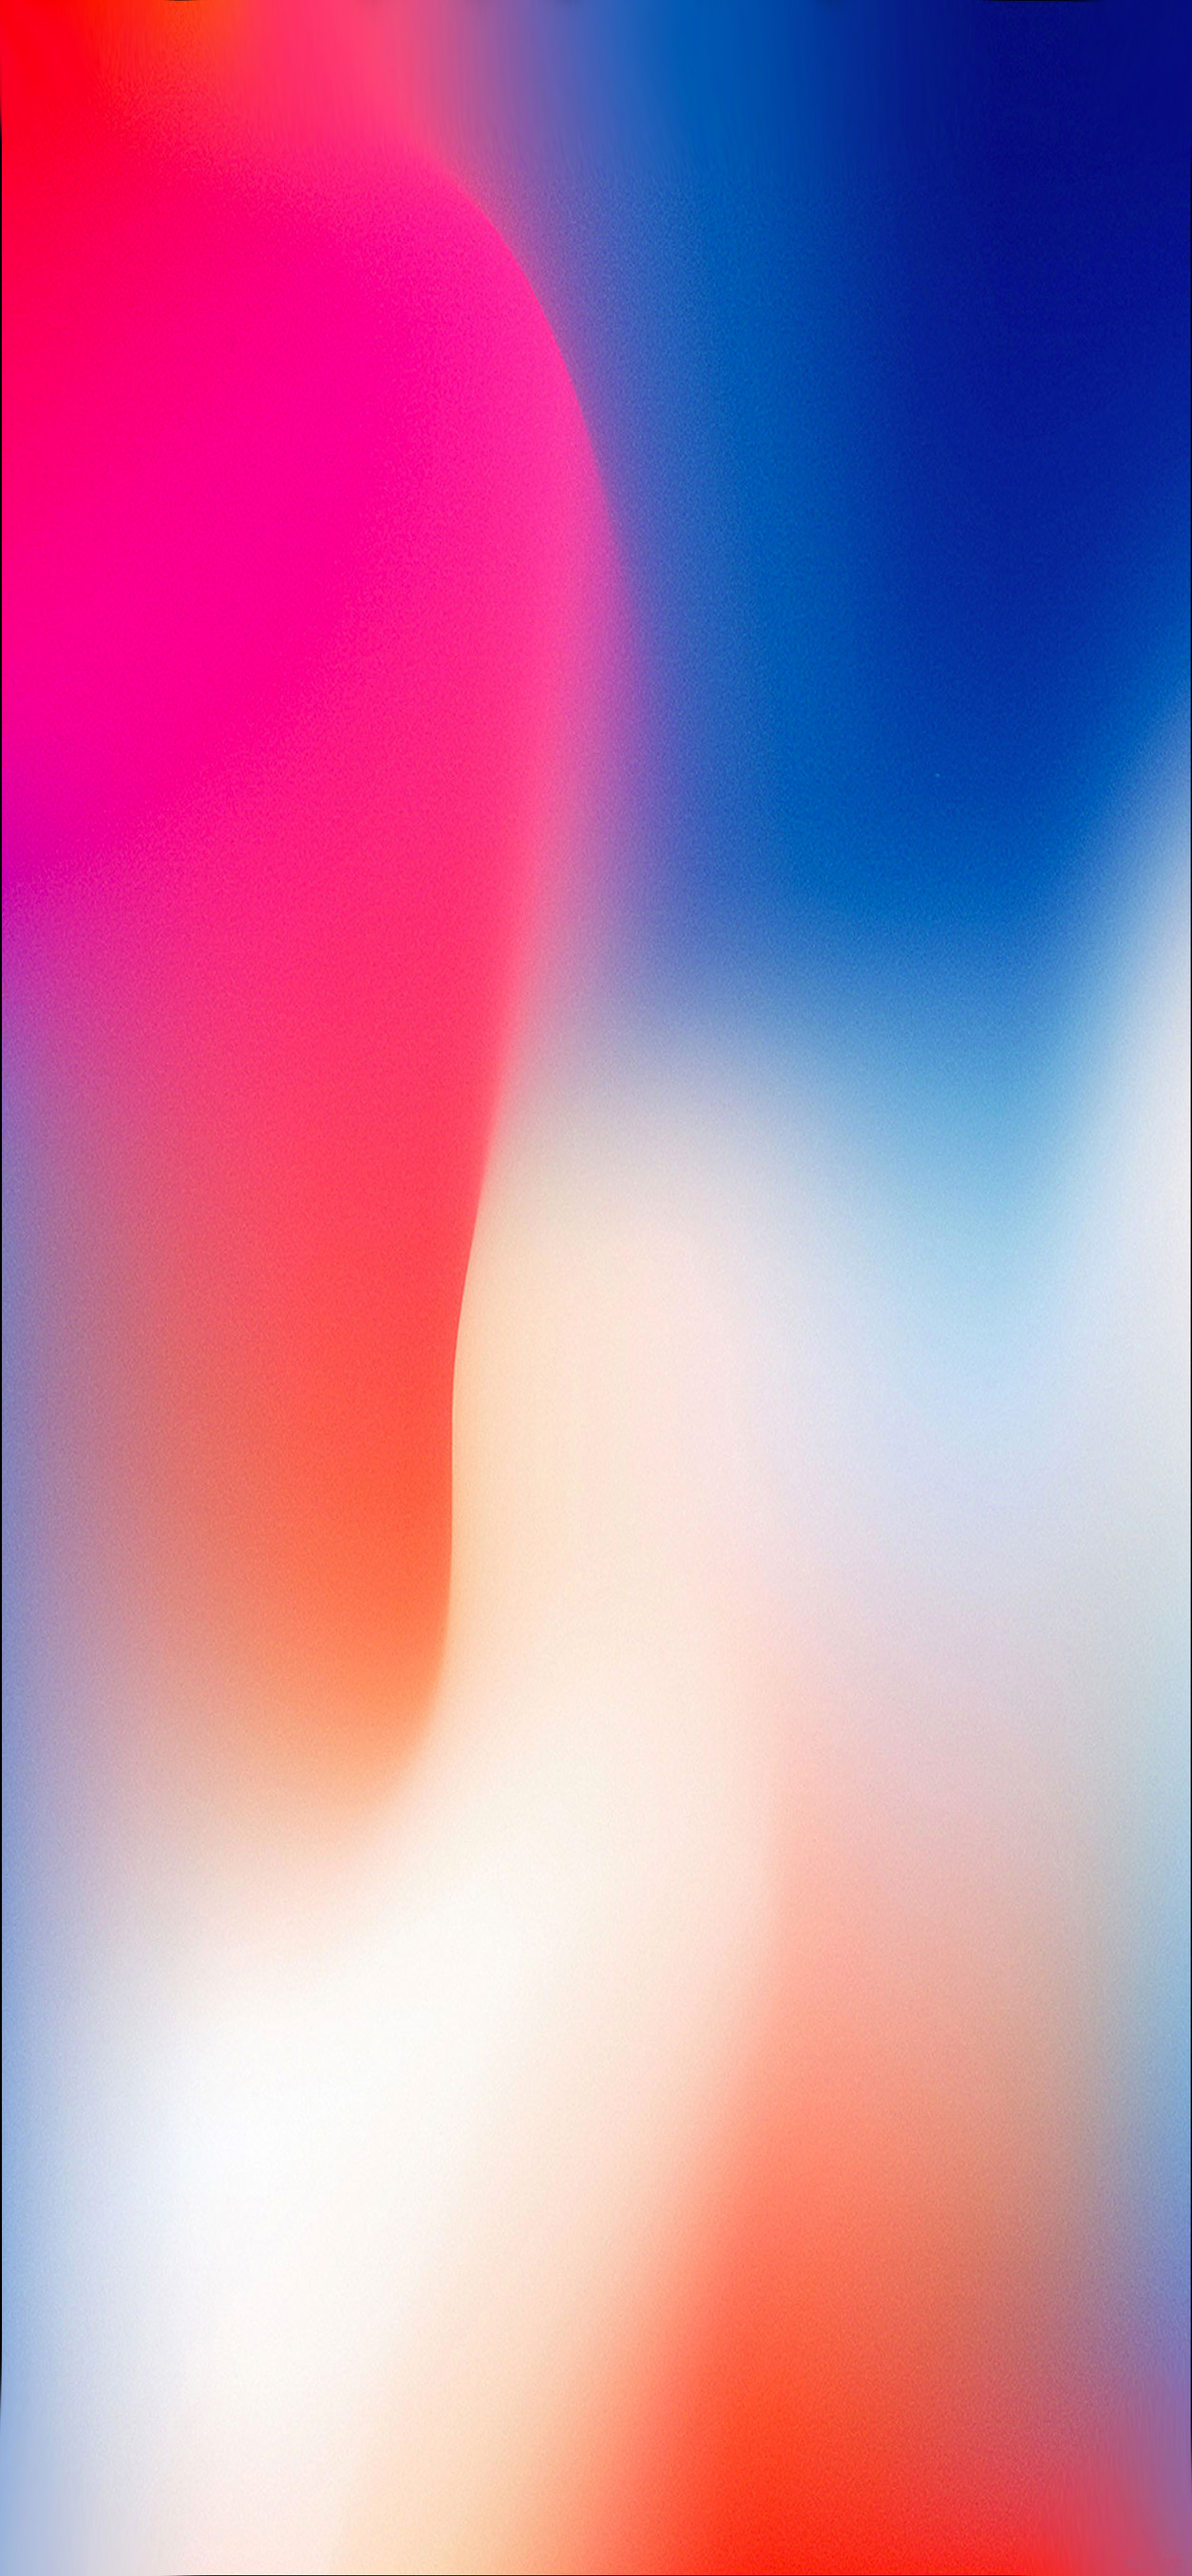 1255x2712 iPhone X FLAGSHIP WALLPAPER If any one interested ...